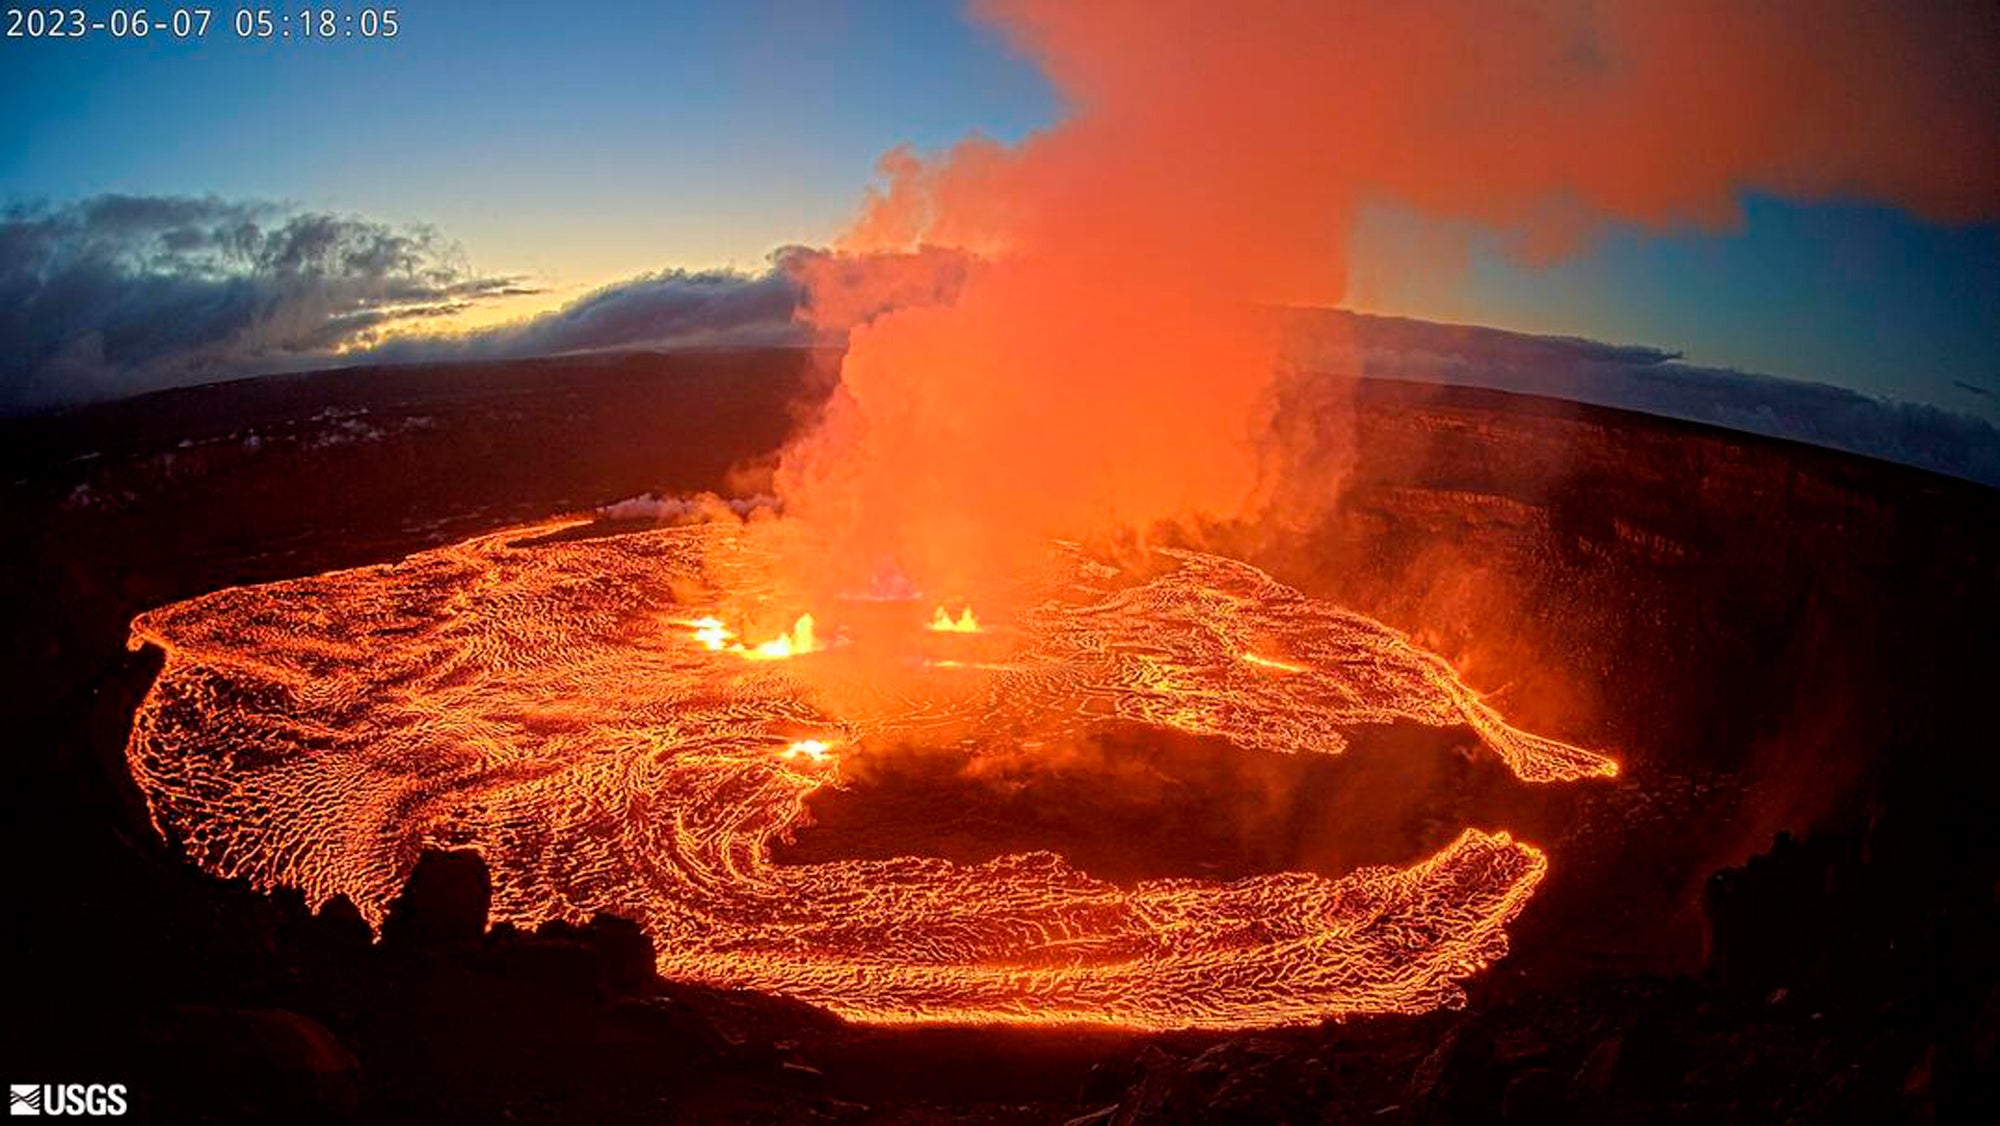 One visitor spotted 15 lava fountains, which were around 46m high